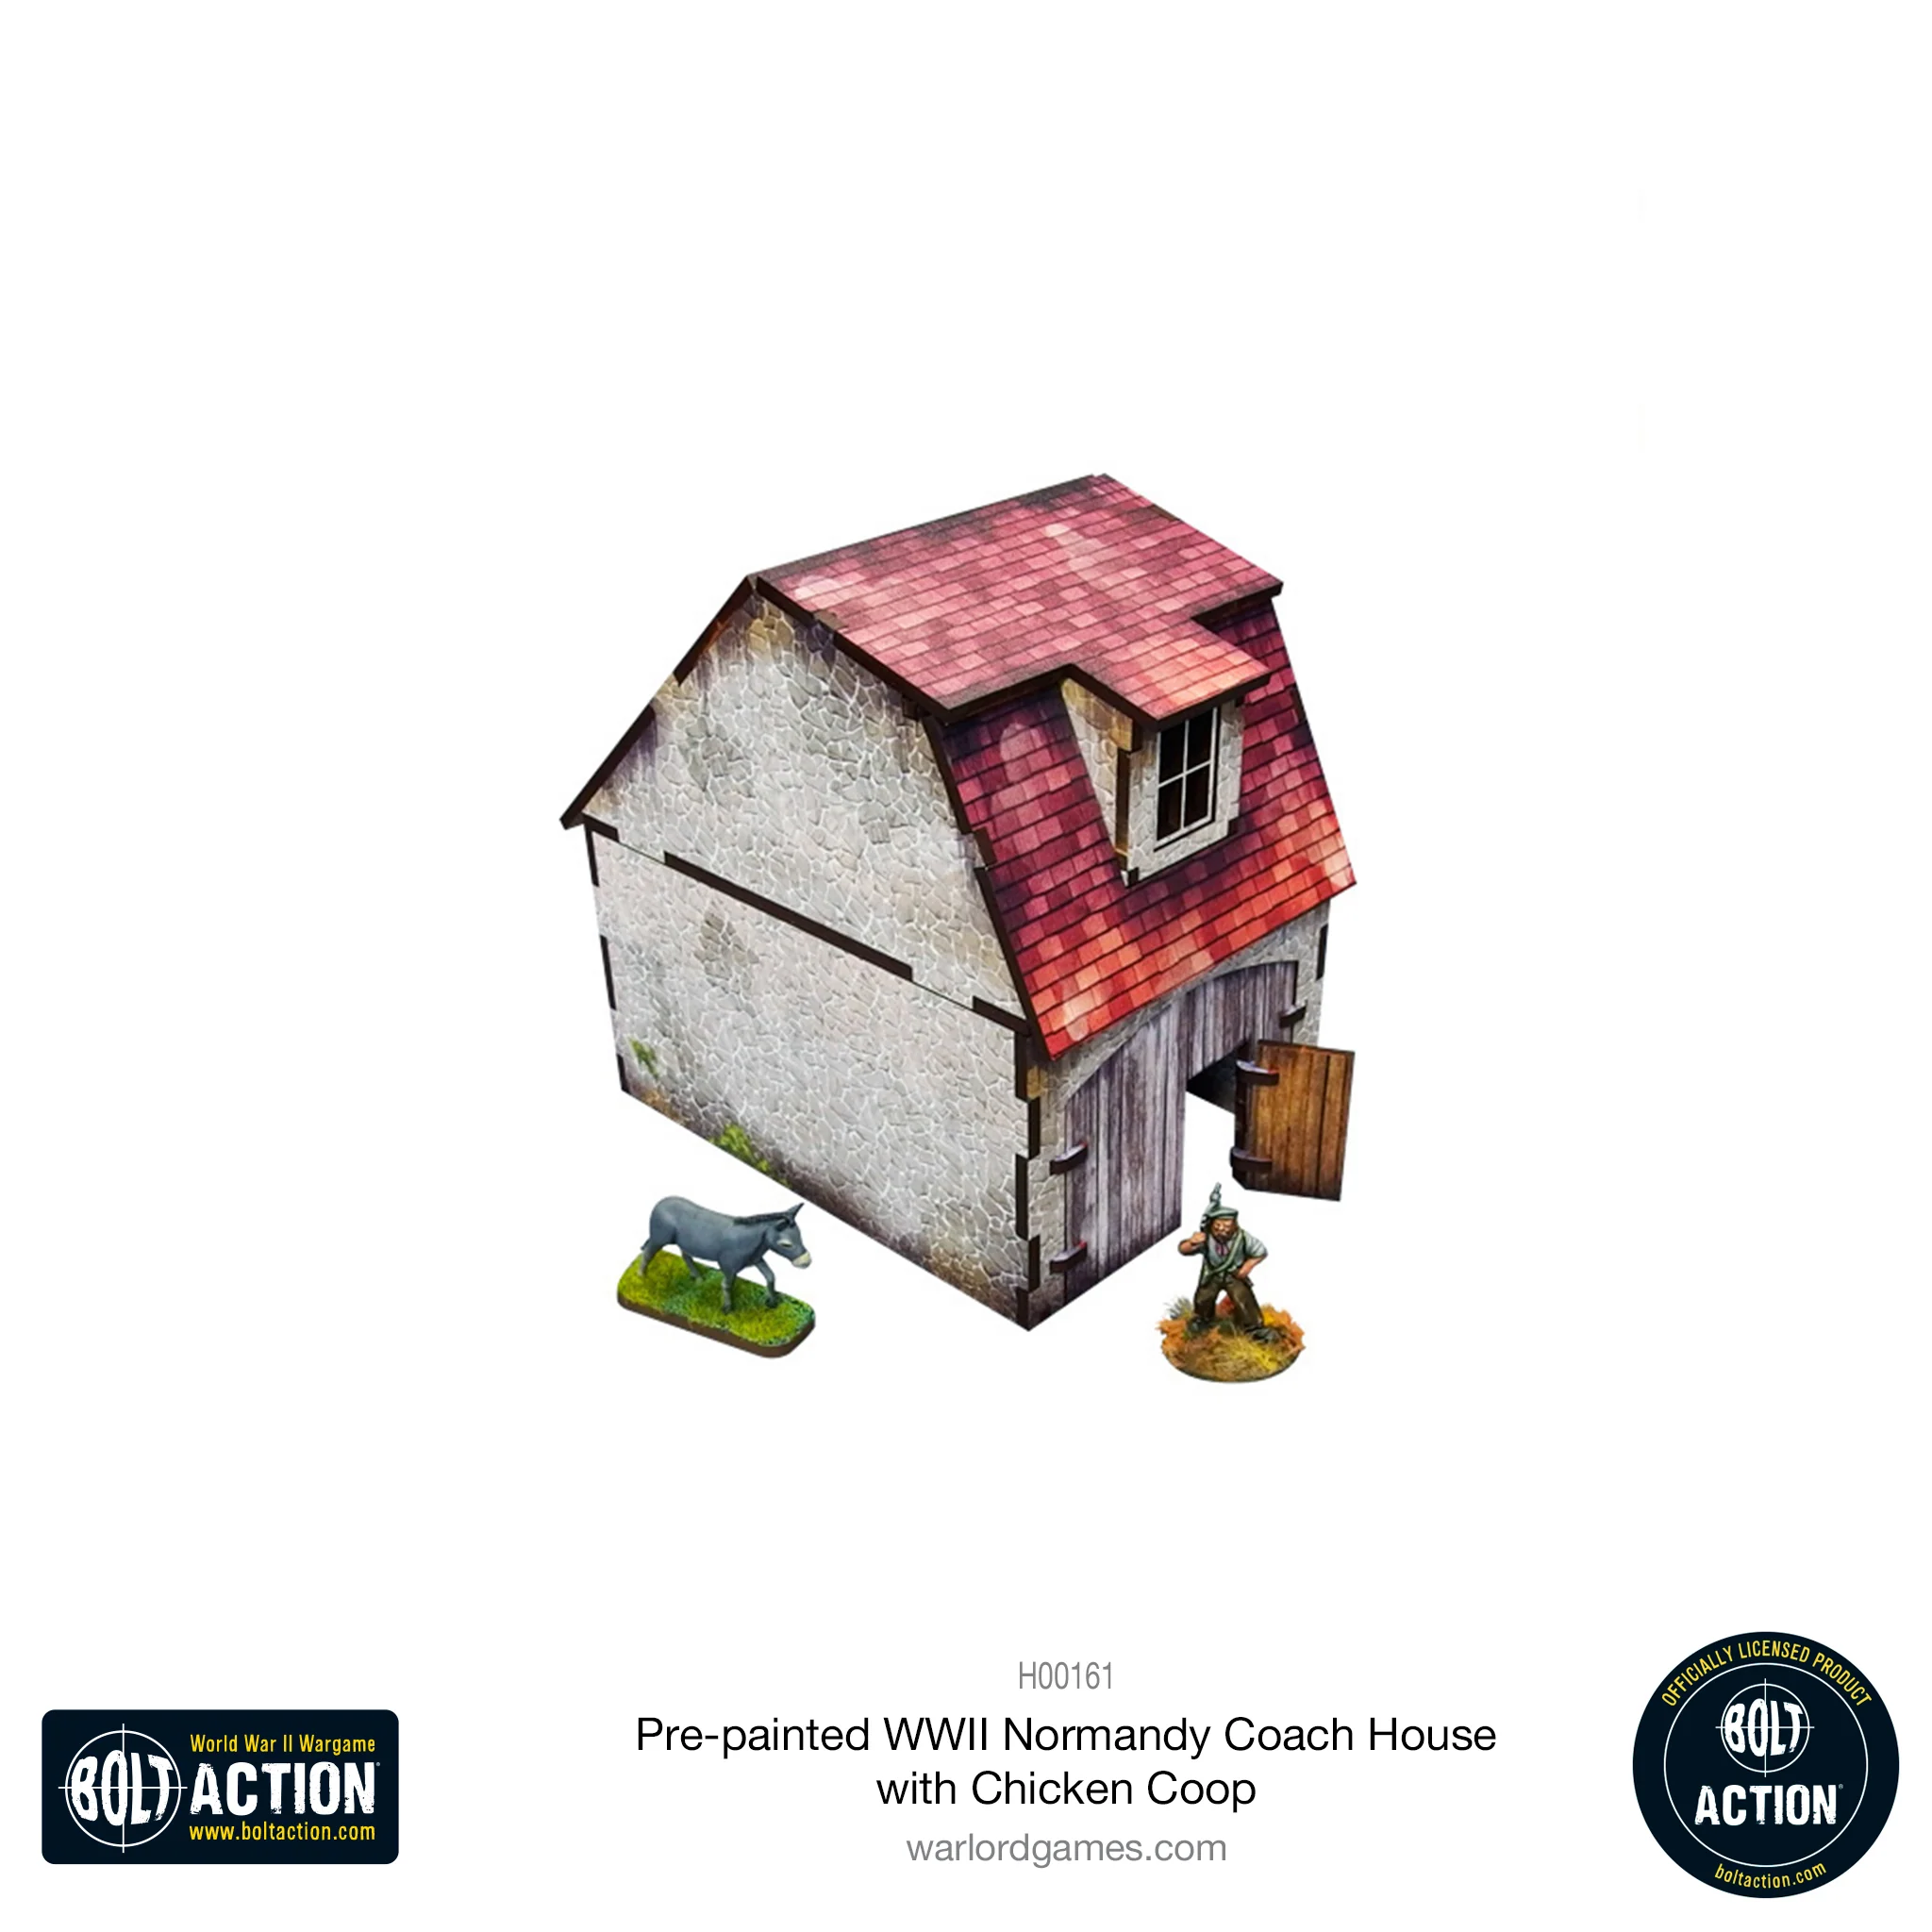 Bolt Action: Pre-Painted WWII Normandy Coach House With Chicken Coop-1711116714-i8izo.webp